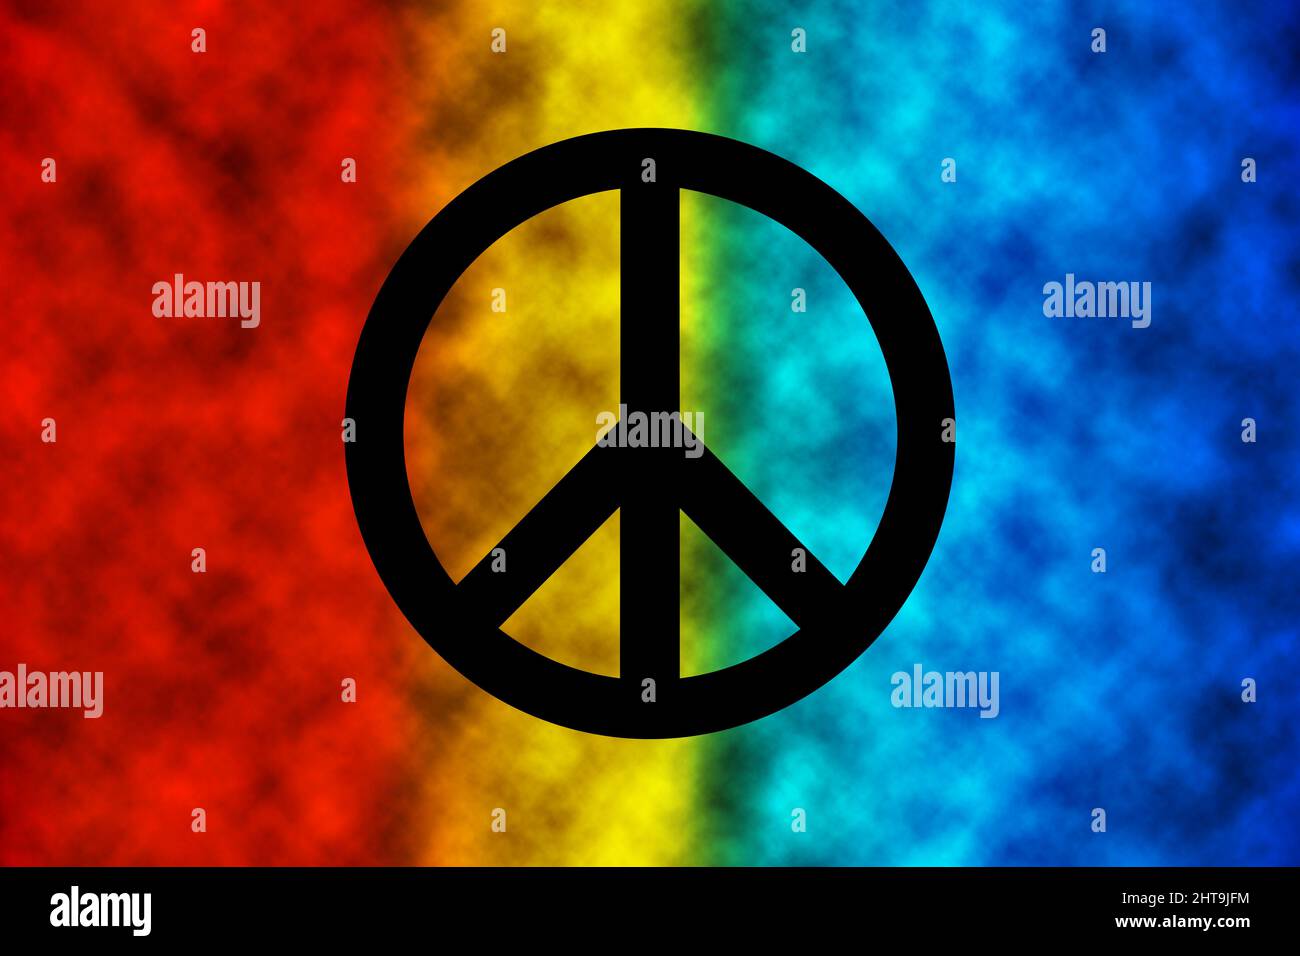 Peace background. Black symbol of peace on colorful background. Stock Photo